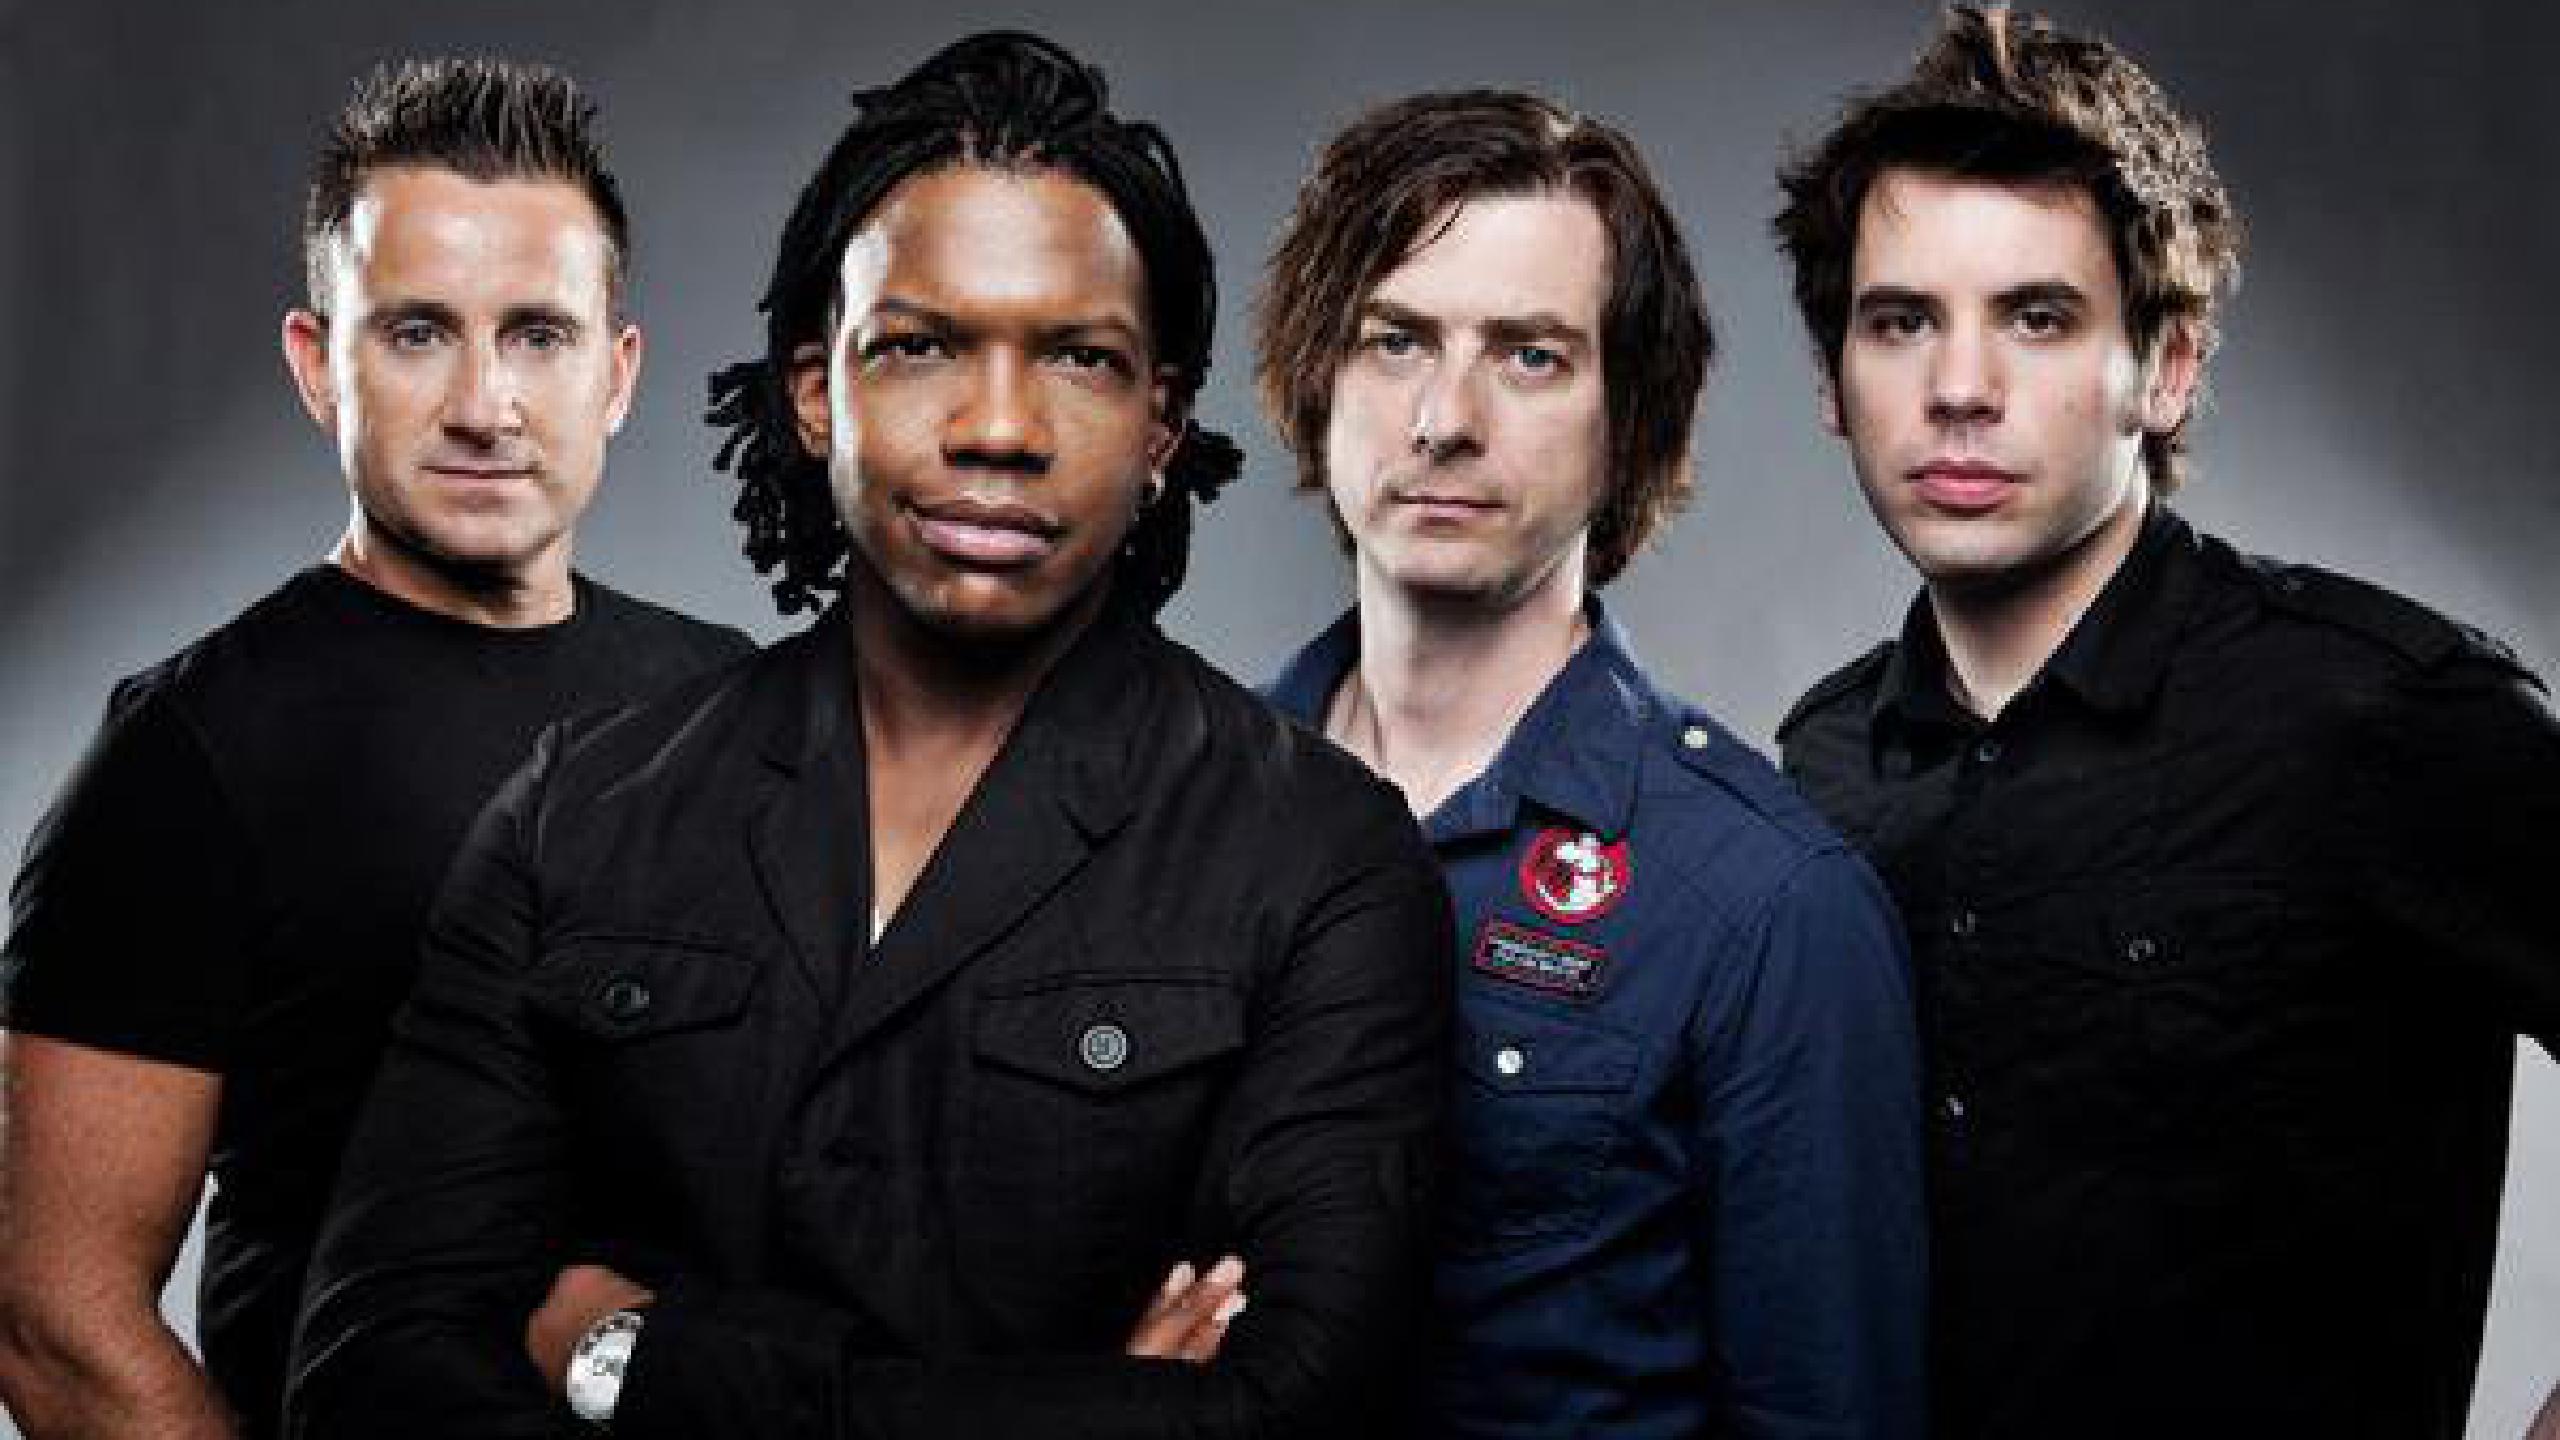 Newsboys tour dates 2020 2021. Newsboys tickets and concerts. Wegow United States